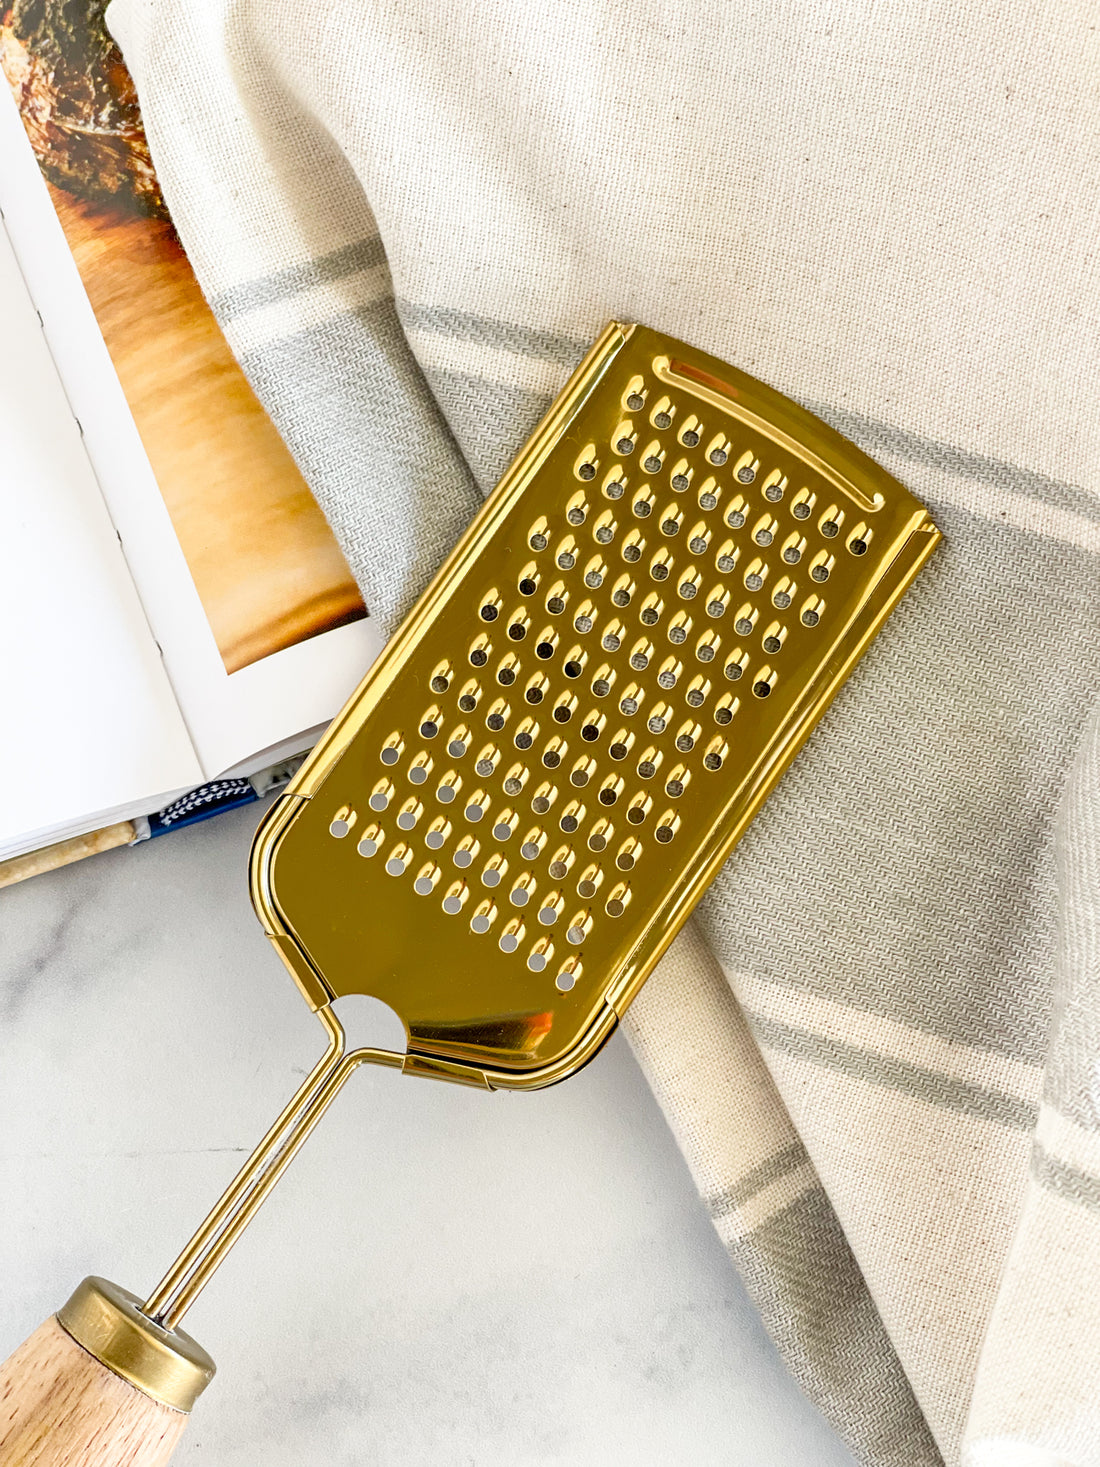 Standing Stainless Steel Grater with Wood Handle, Gold Finish – Salt &  Honey Market